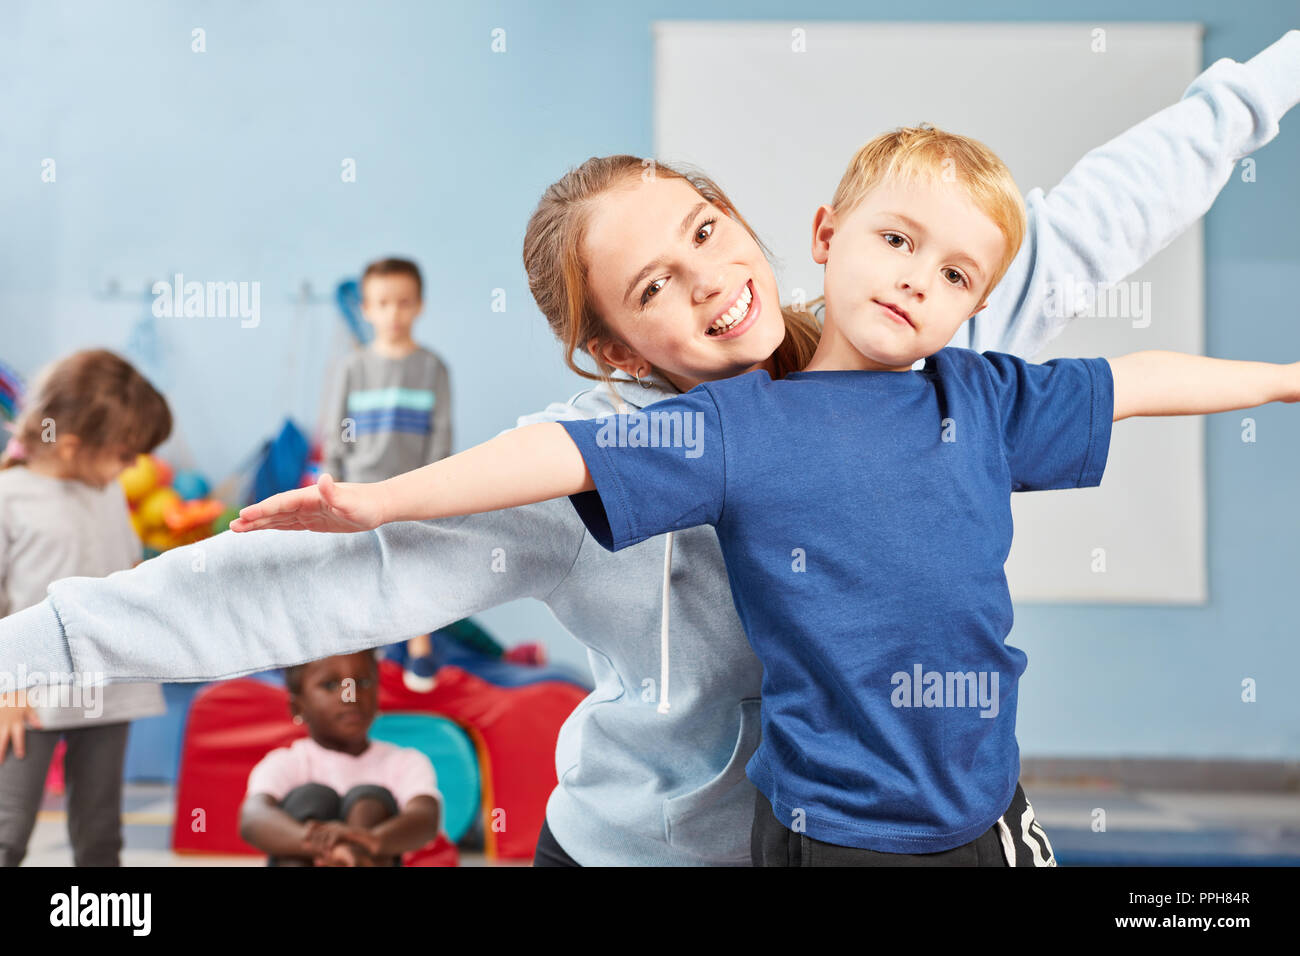 Boy doing stretching exercise together with wife as a teacher or sports teacher Stock Photo